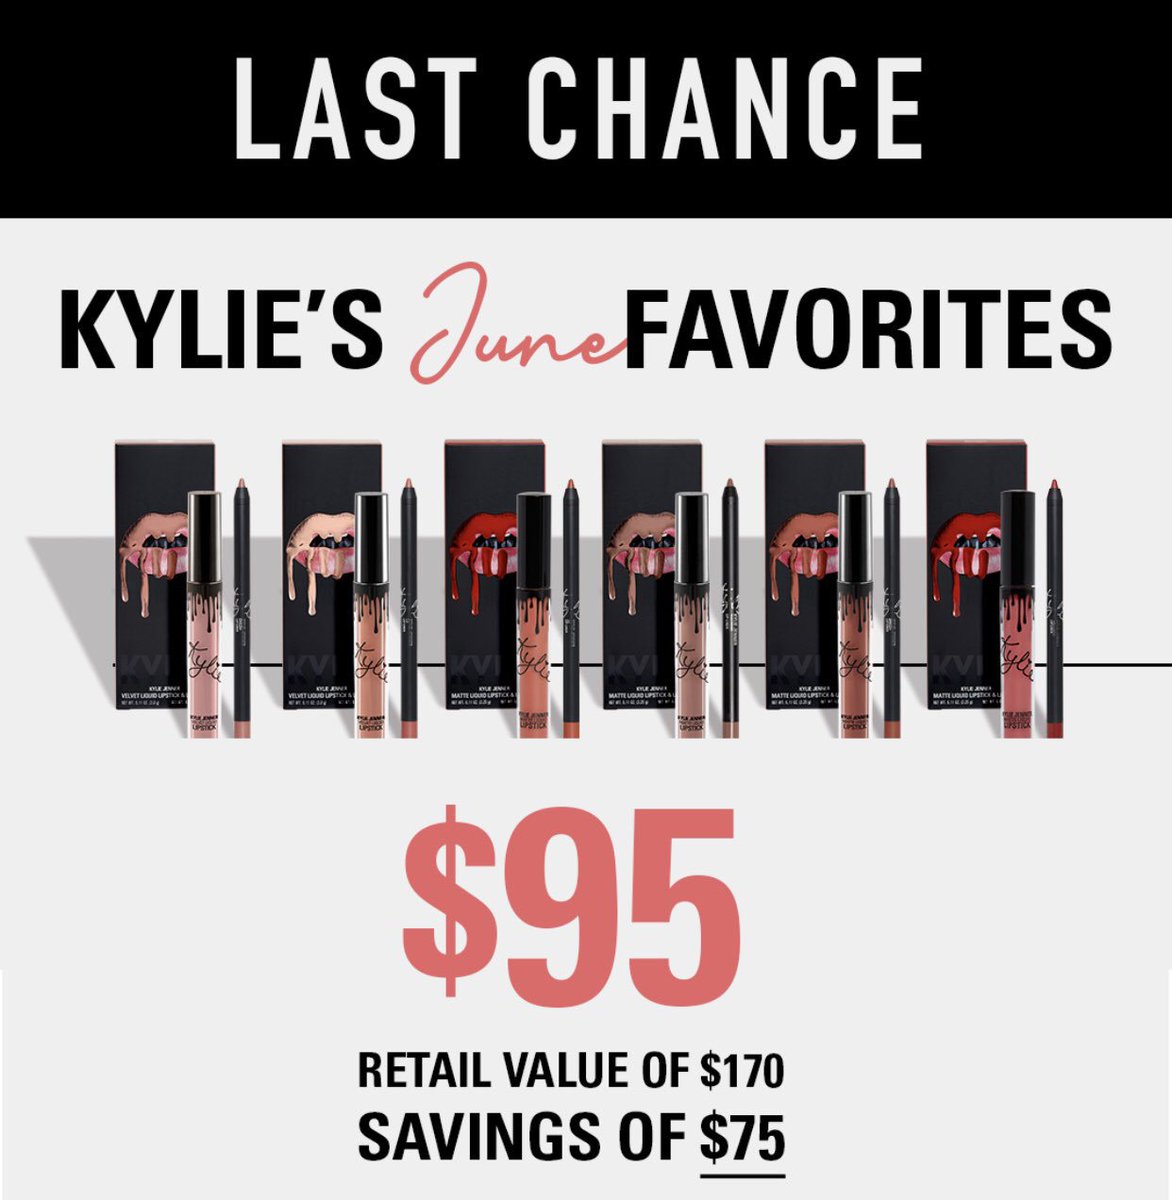 last day to shop my June bundle! 6 lip kits for only $95 https://t.co/grYJPAhIW3 https://t.co/arfEGrkHS1